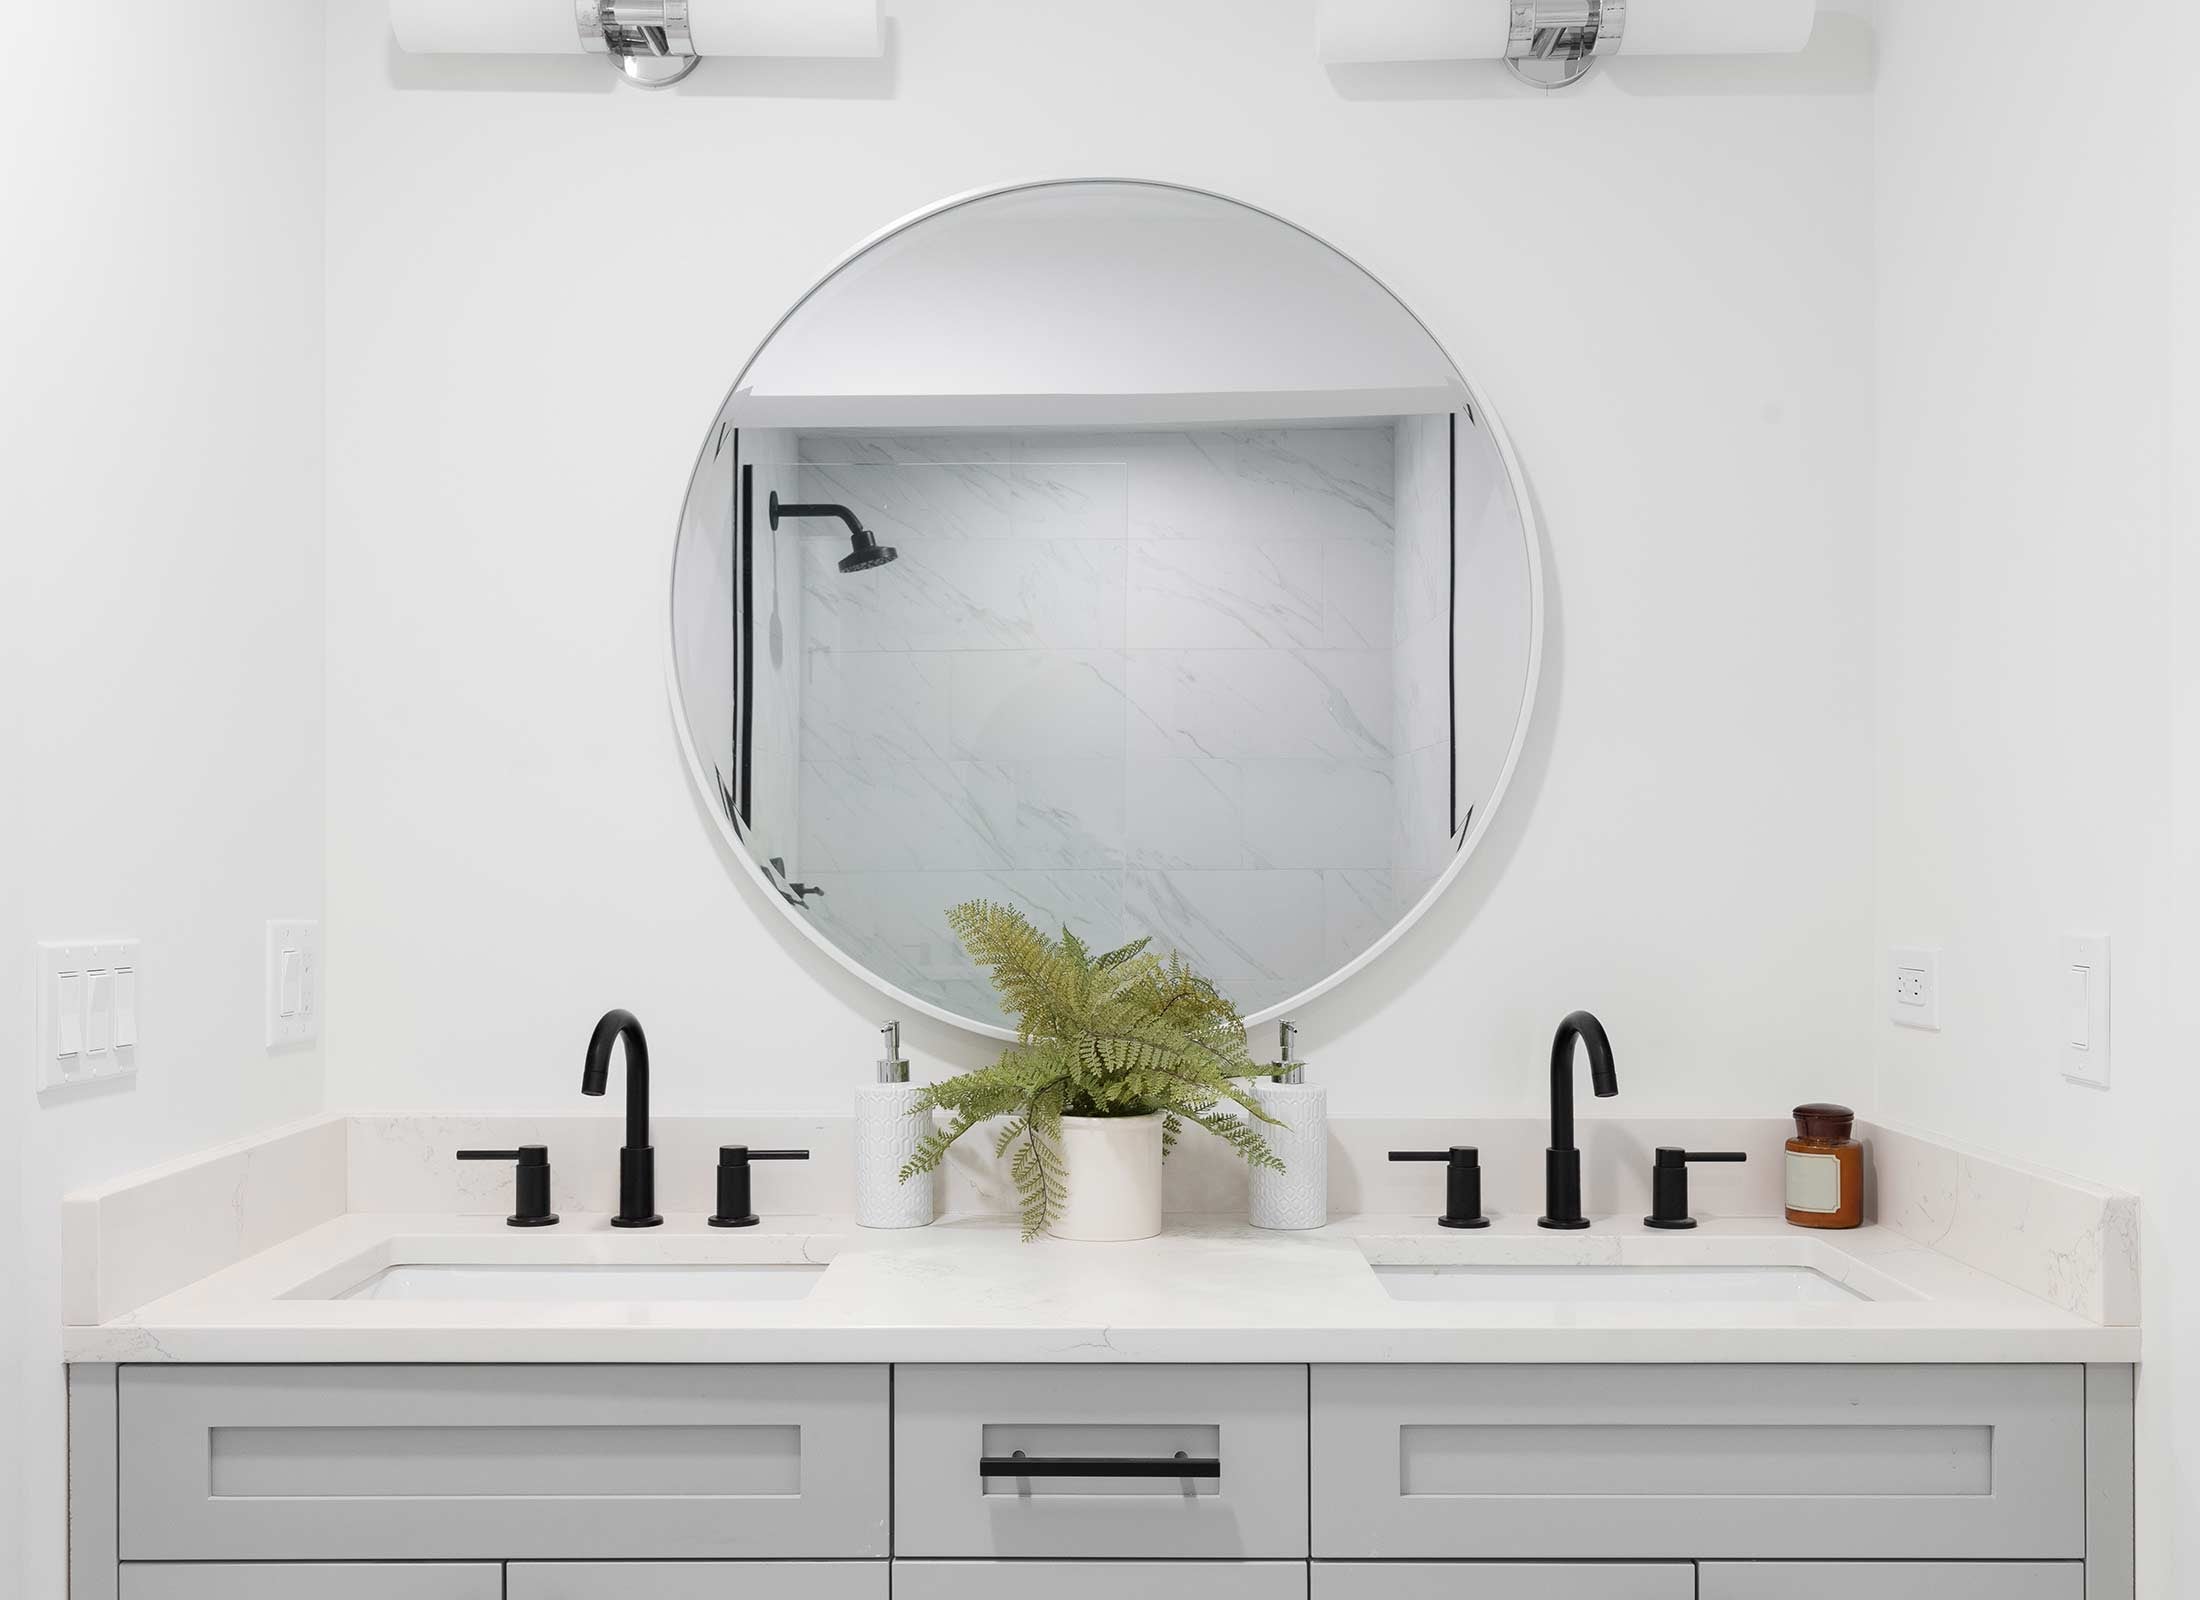 Bathroom Interior with Round Mirror and Sinks